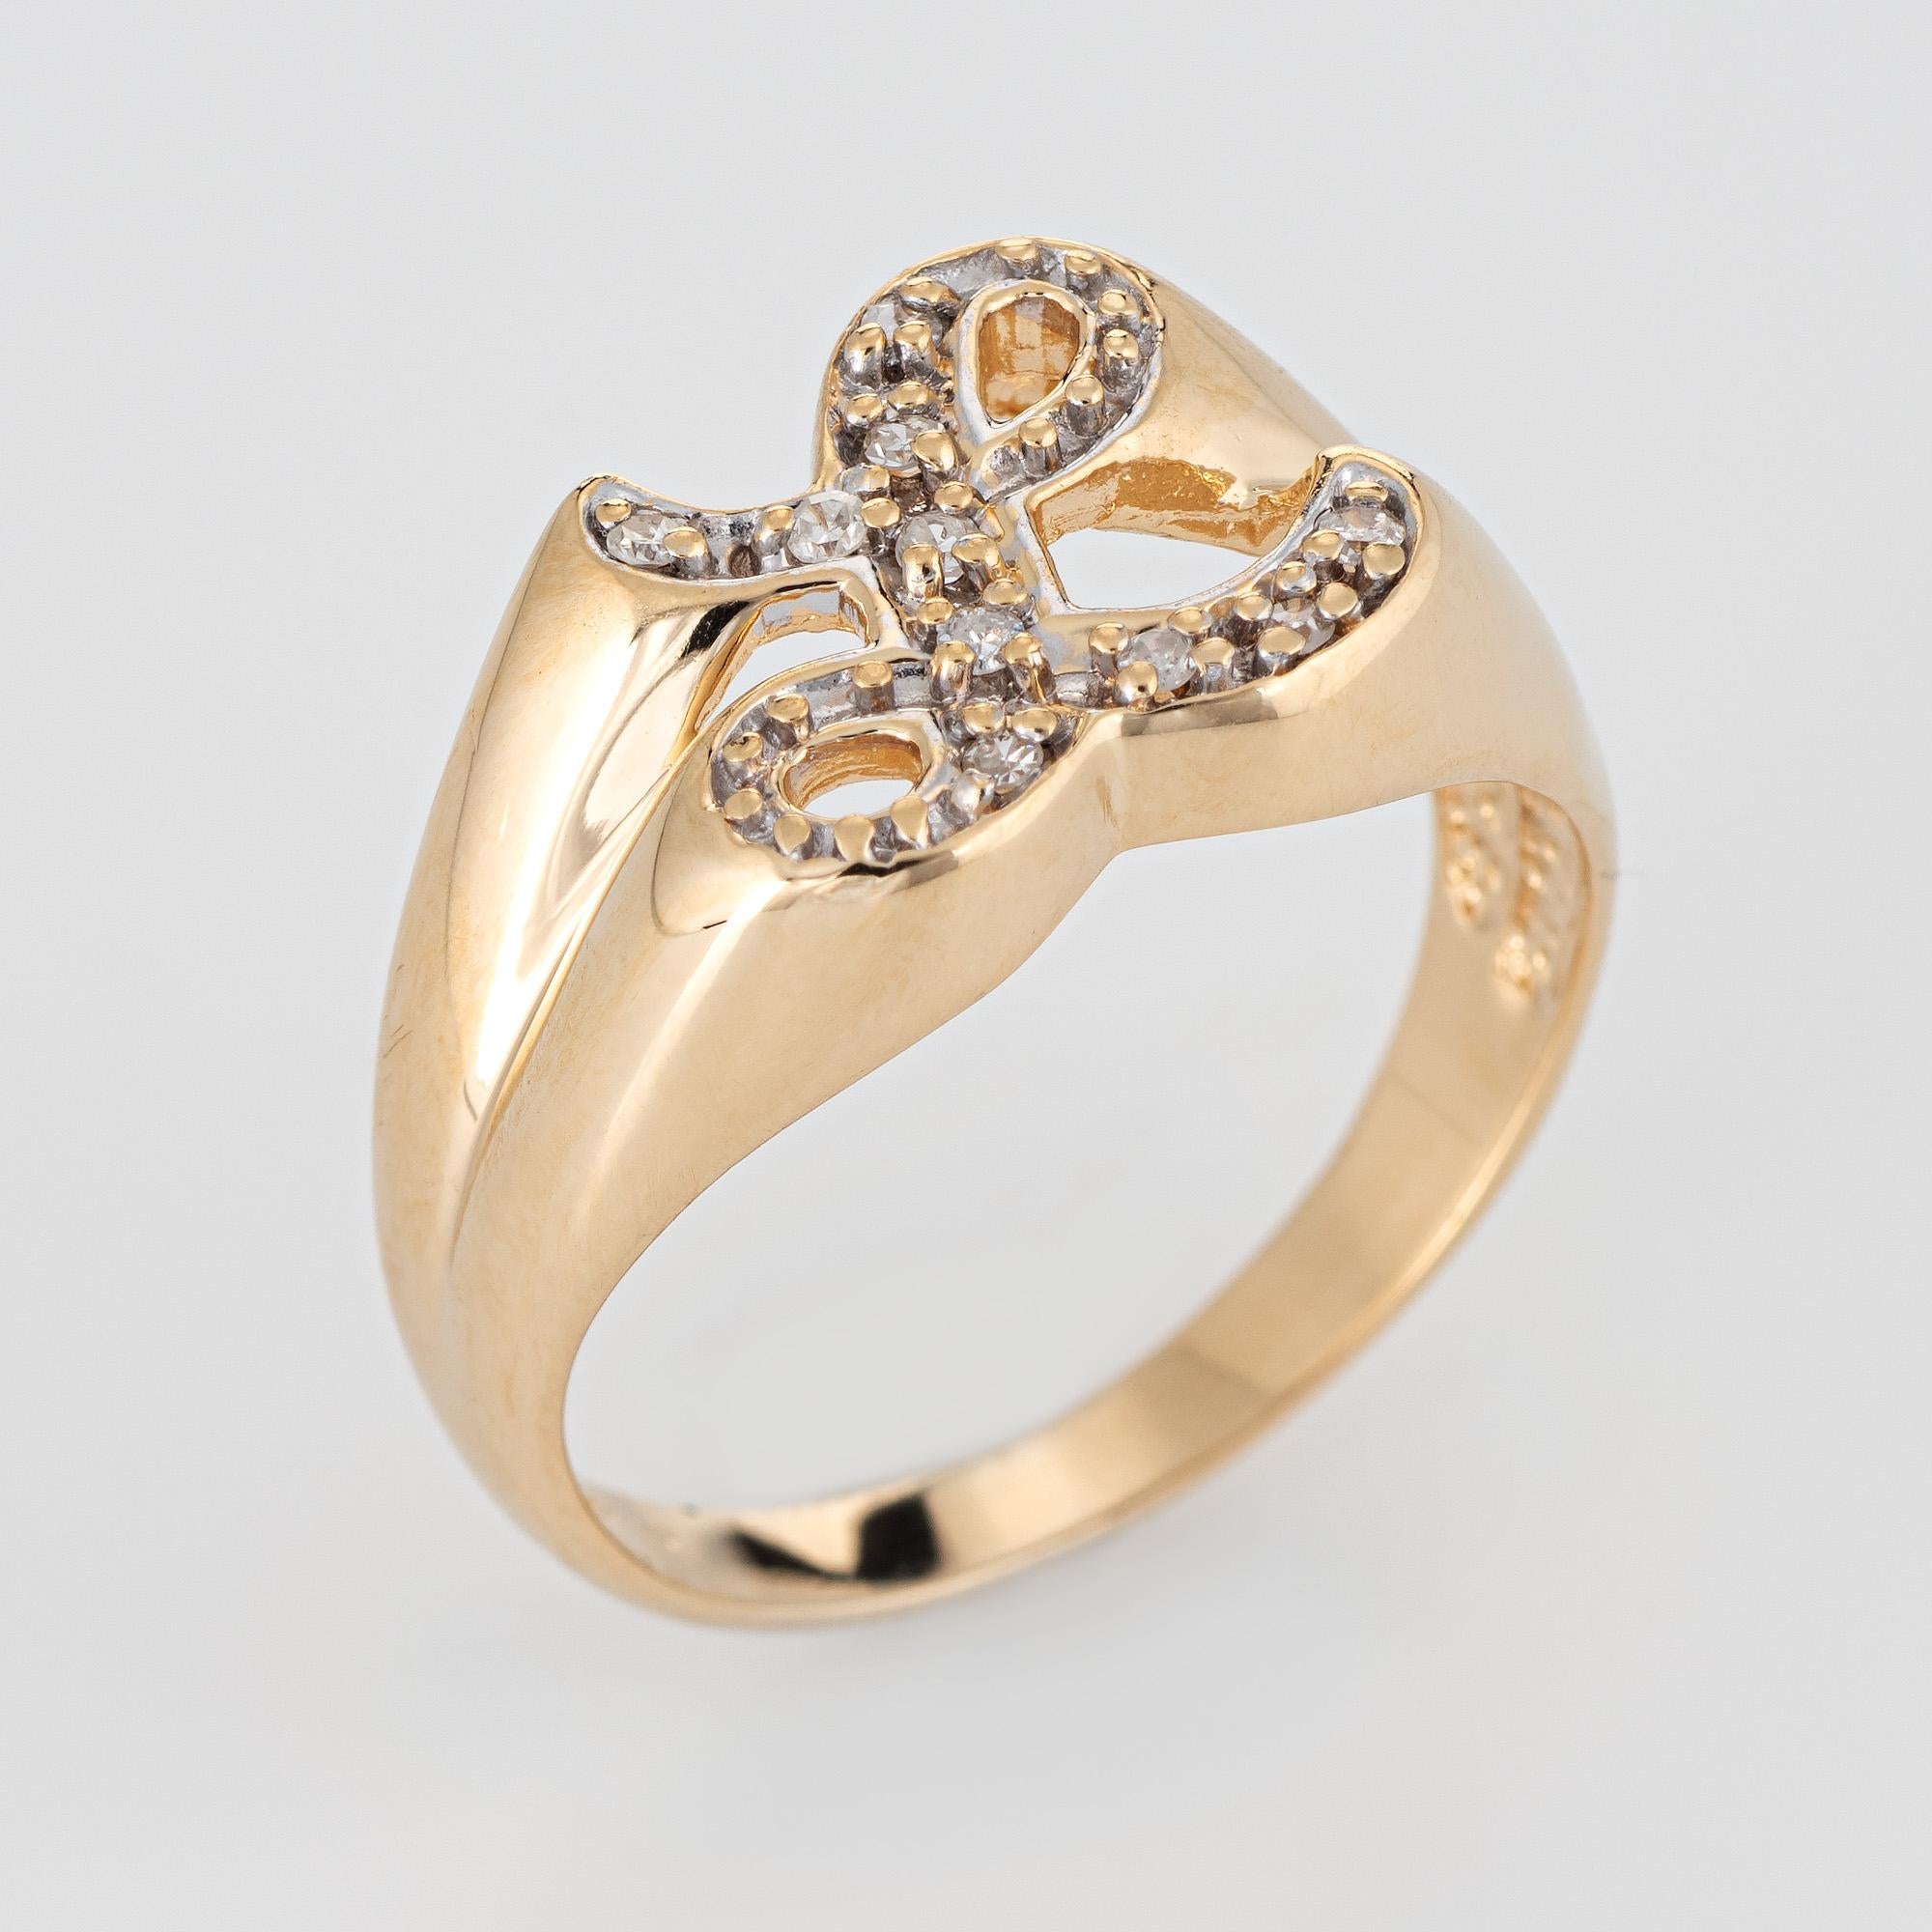 Stylish vintage letter L initial diamond signet ring (circa 1960s to 1970s) crafted in 14 karat yellow gold. 

Diamonds total an estimated 0.10 carats (estimated at I-J color and SI1-I1 clarity). 

The cursive letter 'L' is set with diamonds in an